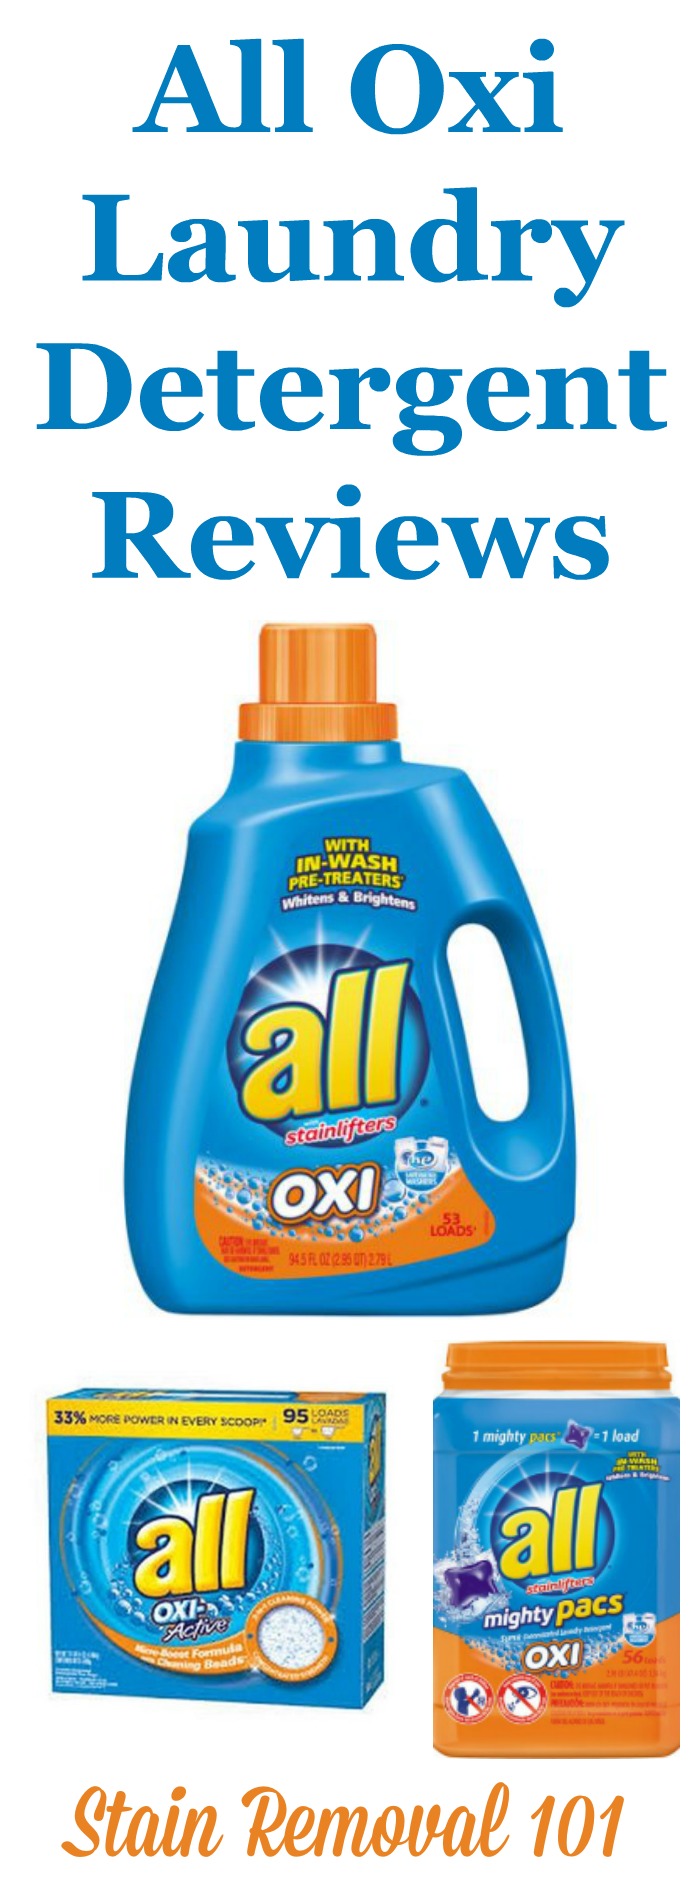 Reviews of All-Oxi laundry detergent, with multiple reports of allergic reactions to the oxygen bleach product within this product. {on Stain Removal 101}